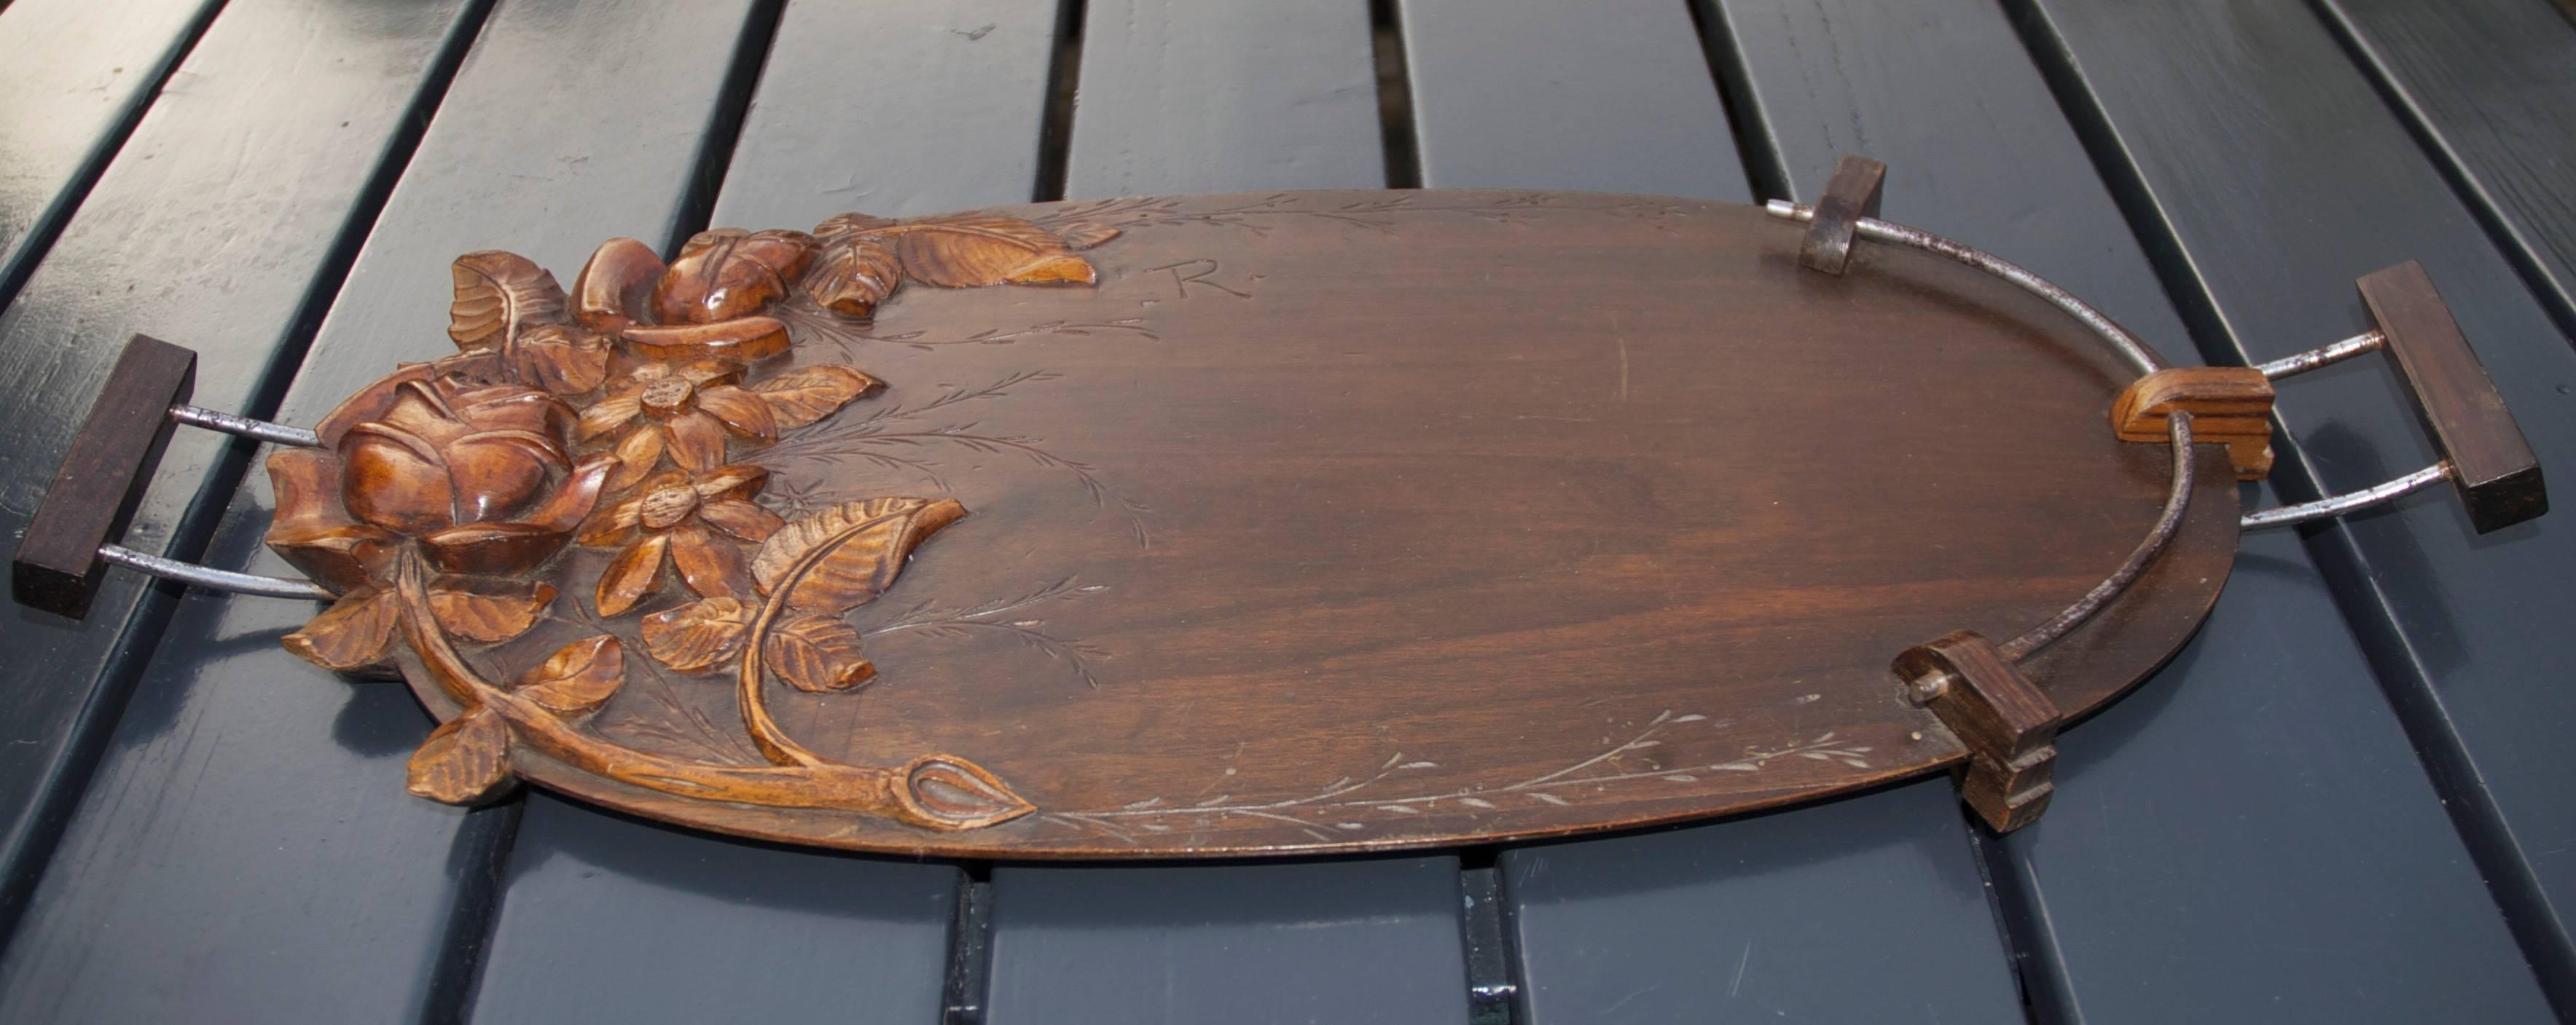 French Unique Art Deco Carved Wood Display or Serving Tray with Floral Design For Sale